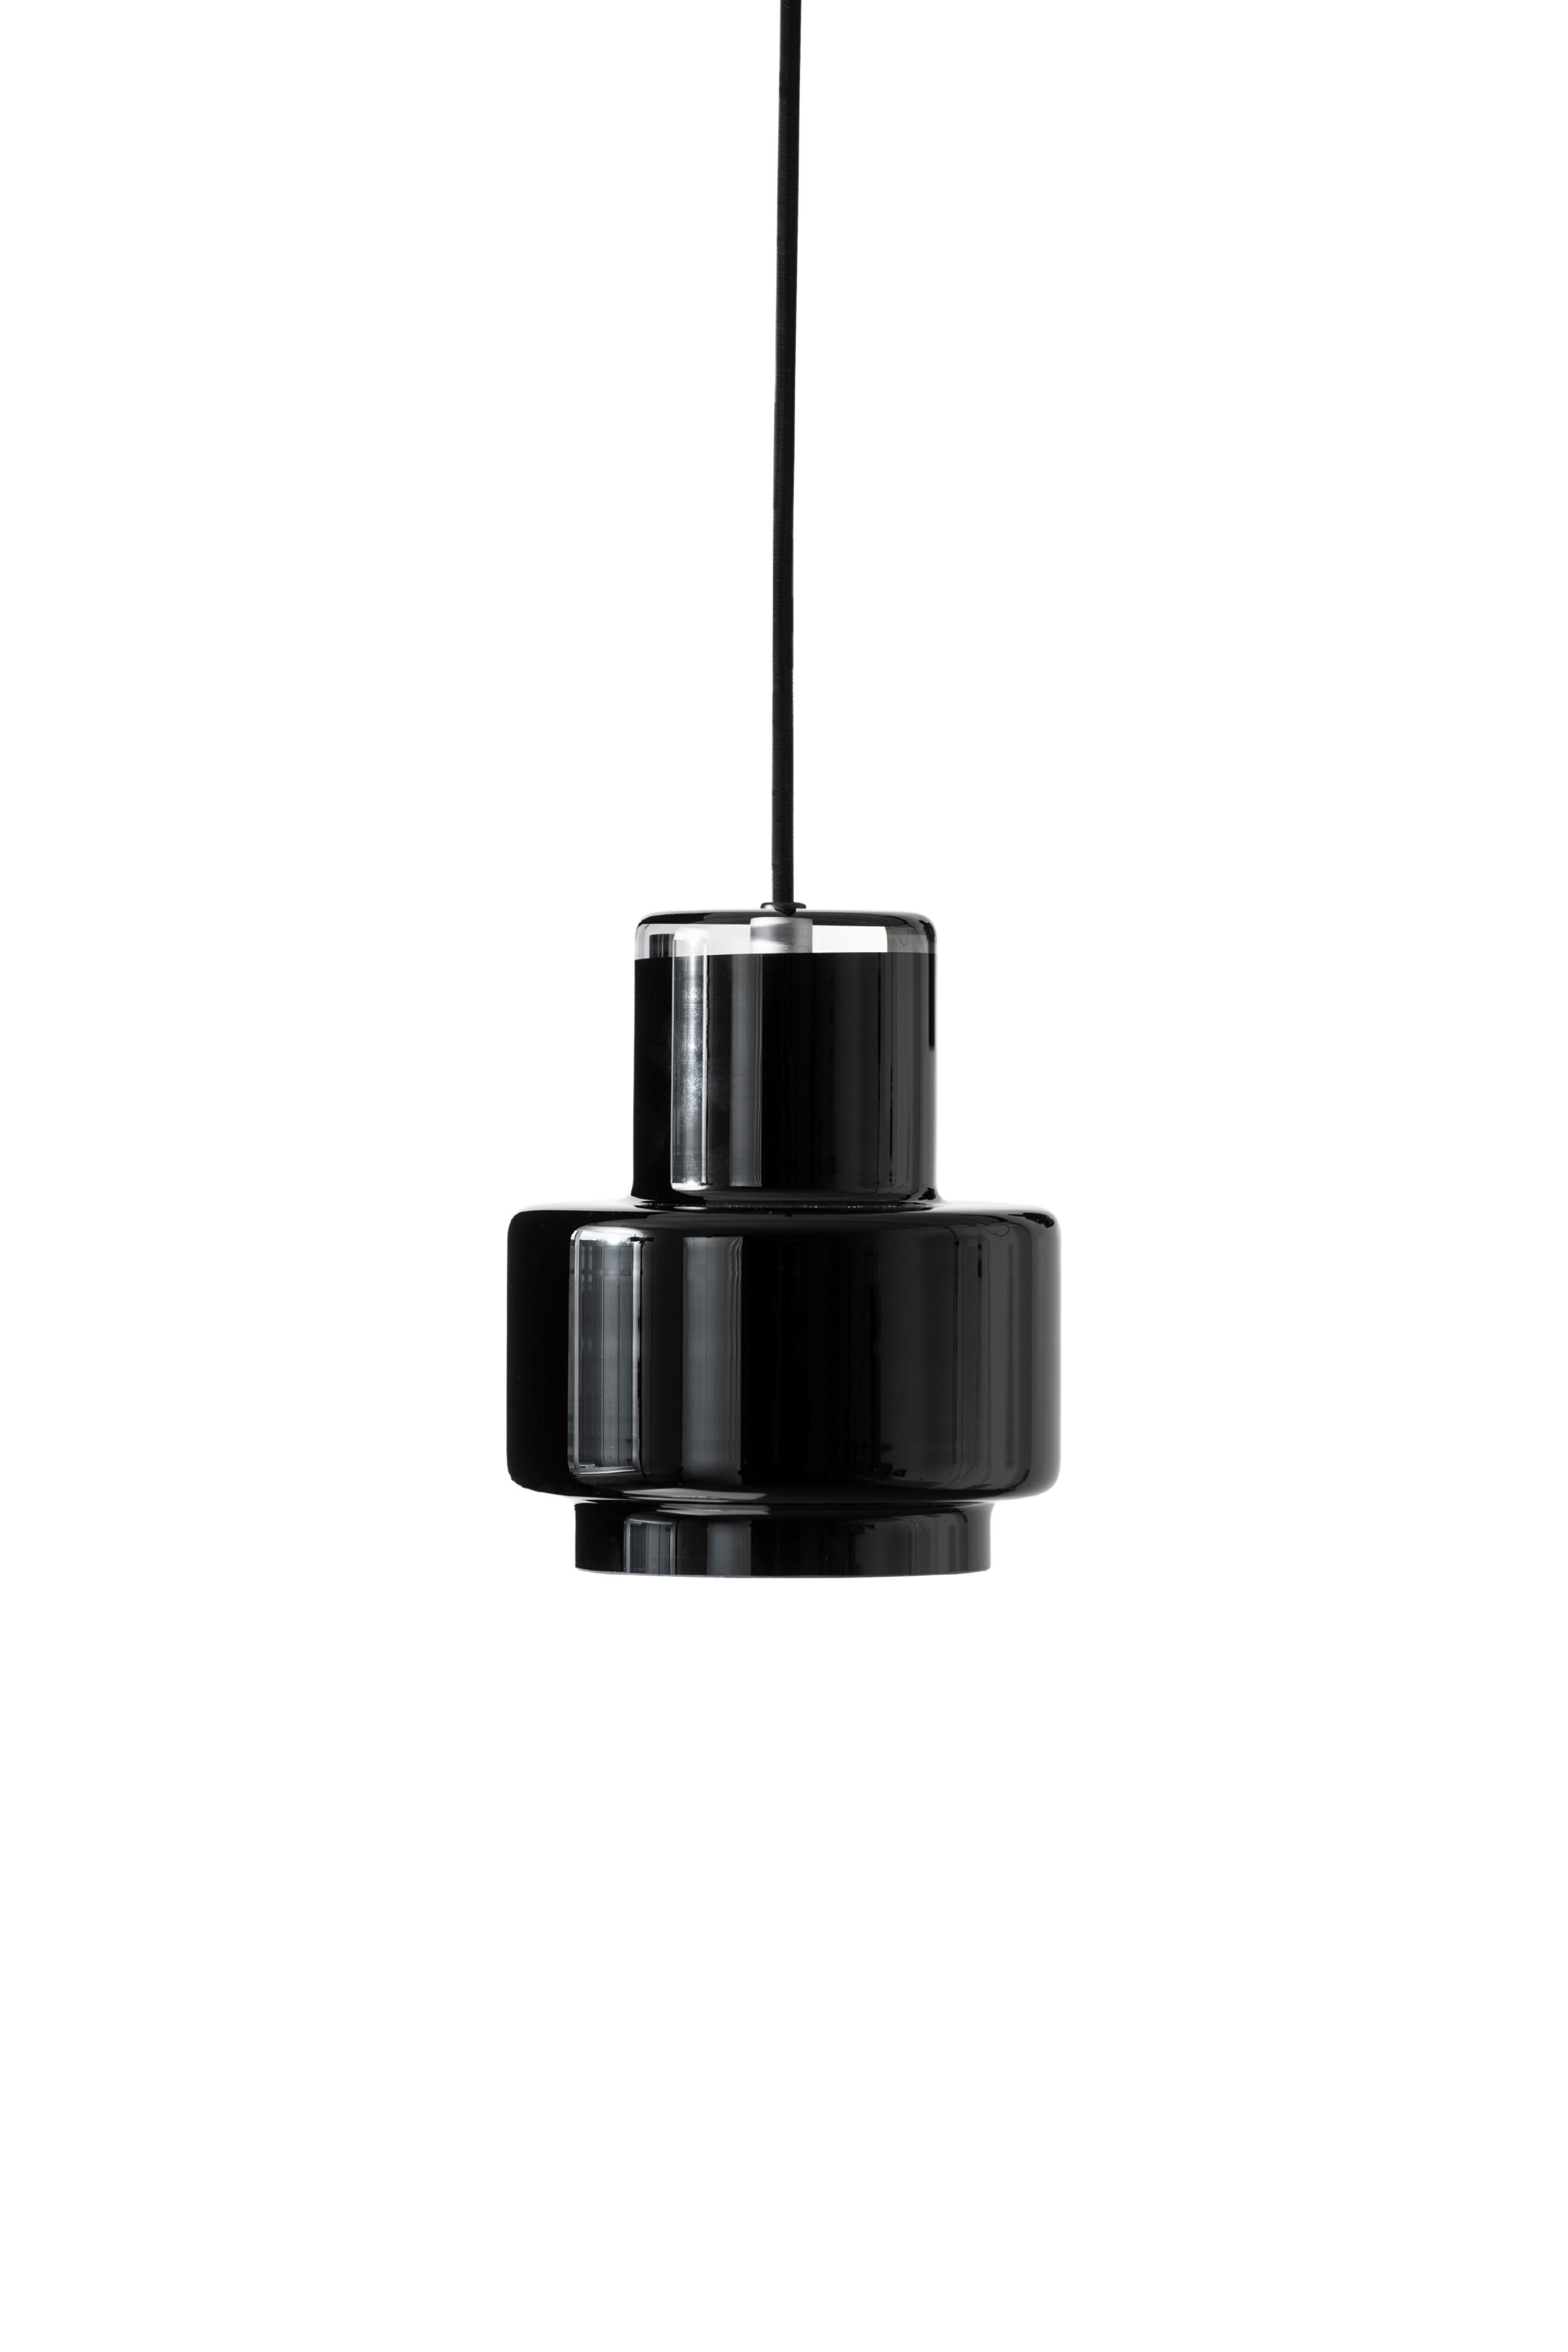 Contemporary Pair of 'Multi L' Glass Pendants in Black by Jokinen and Konu for Innolux For Sale